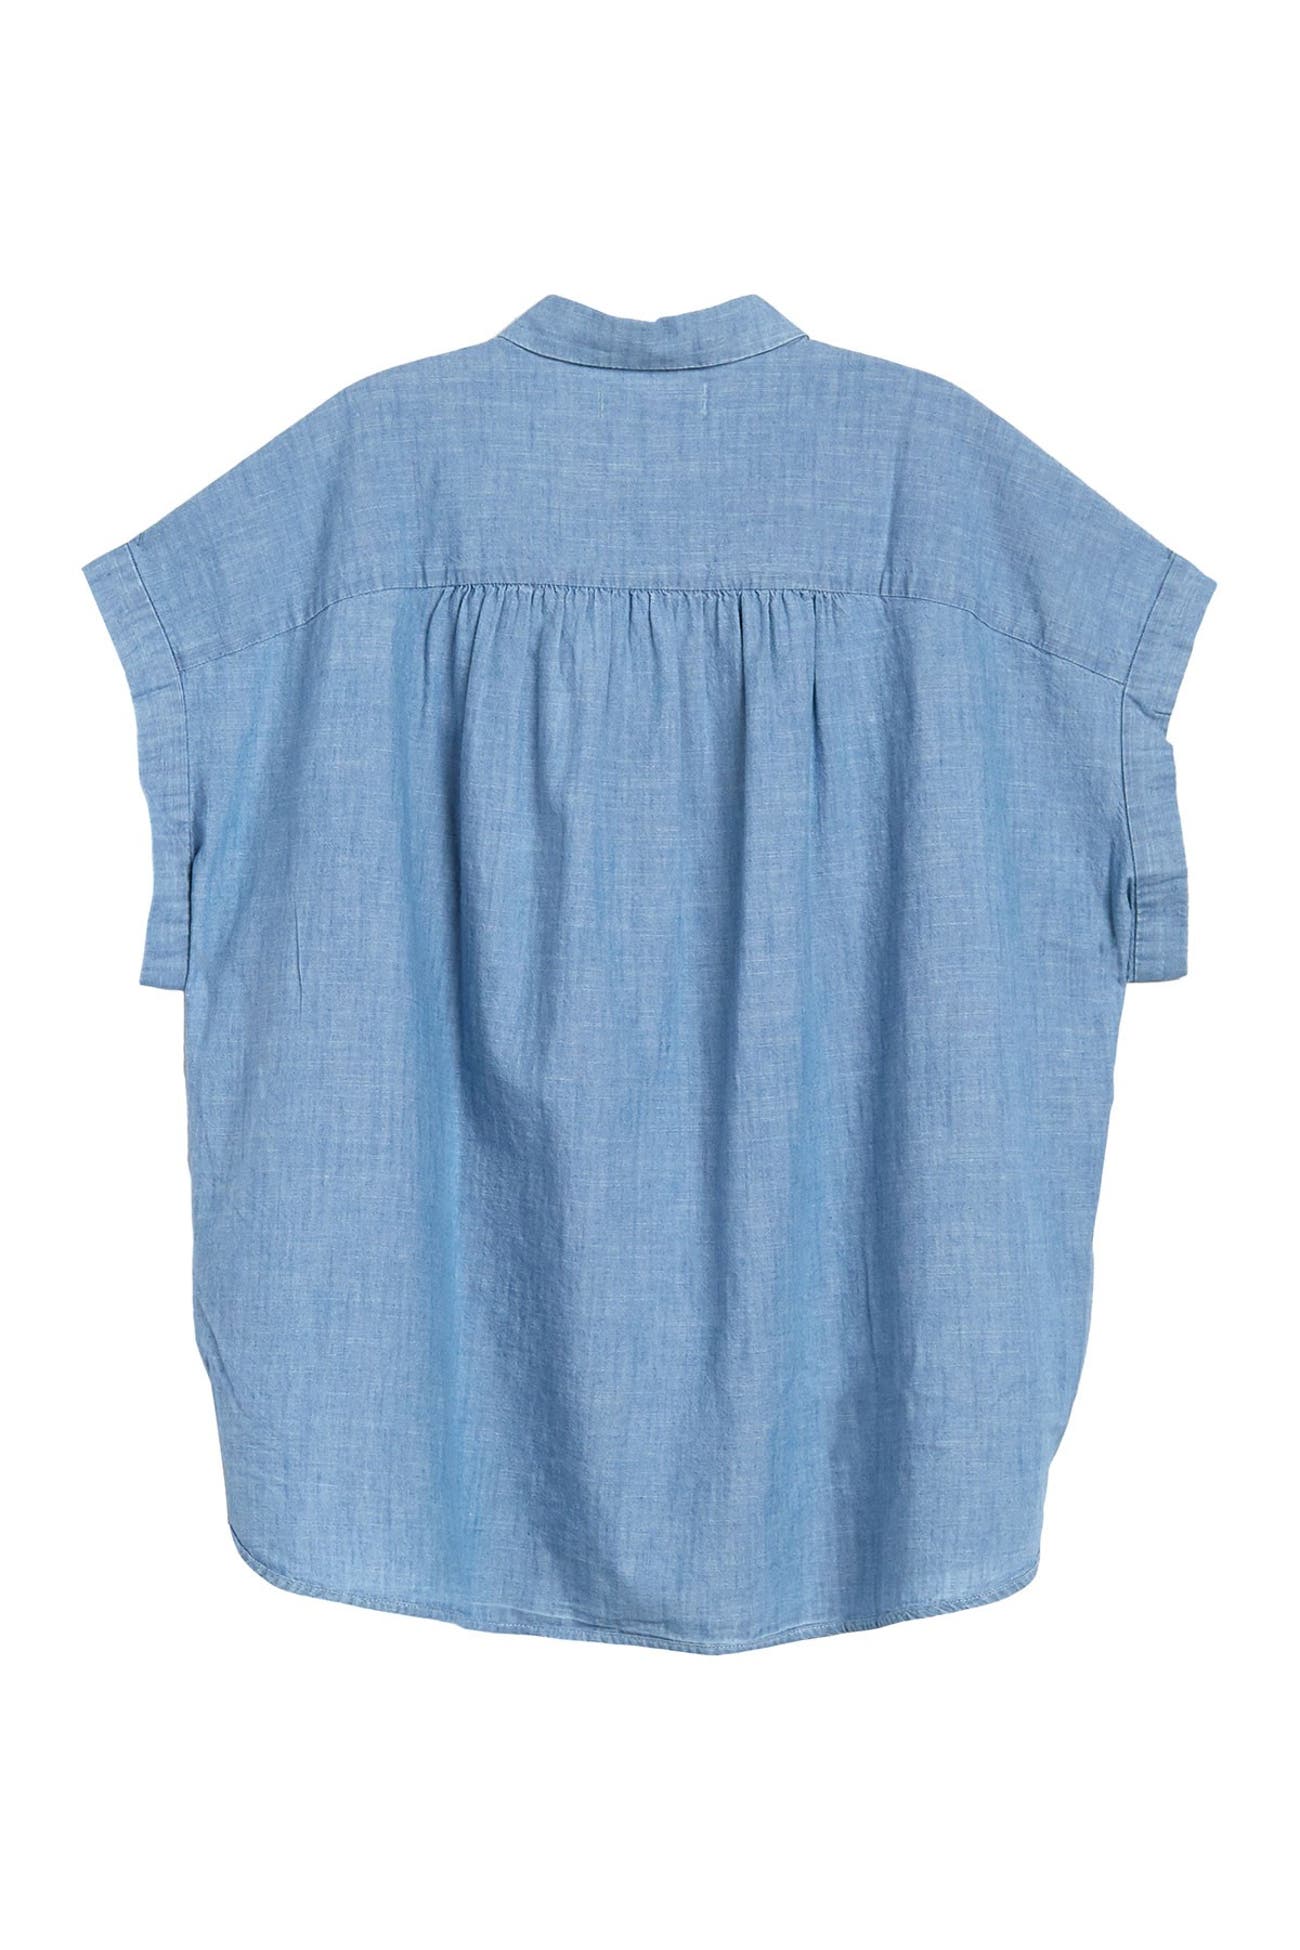 Madewell | Short Sleeve Button Front Chambray Shirt | Nordstrom Rack